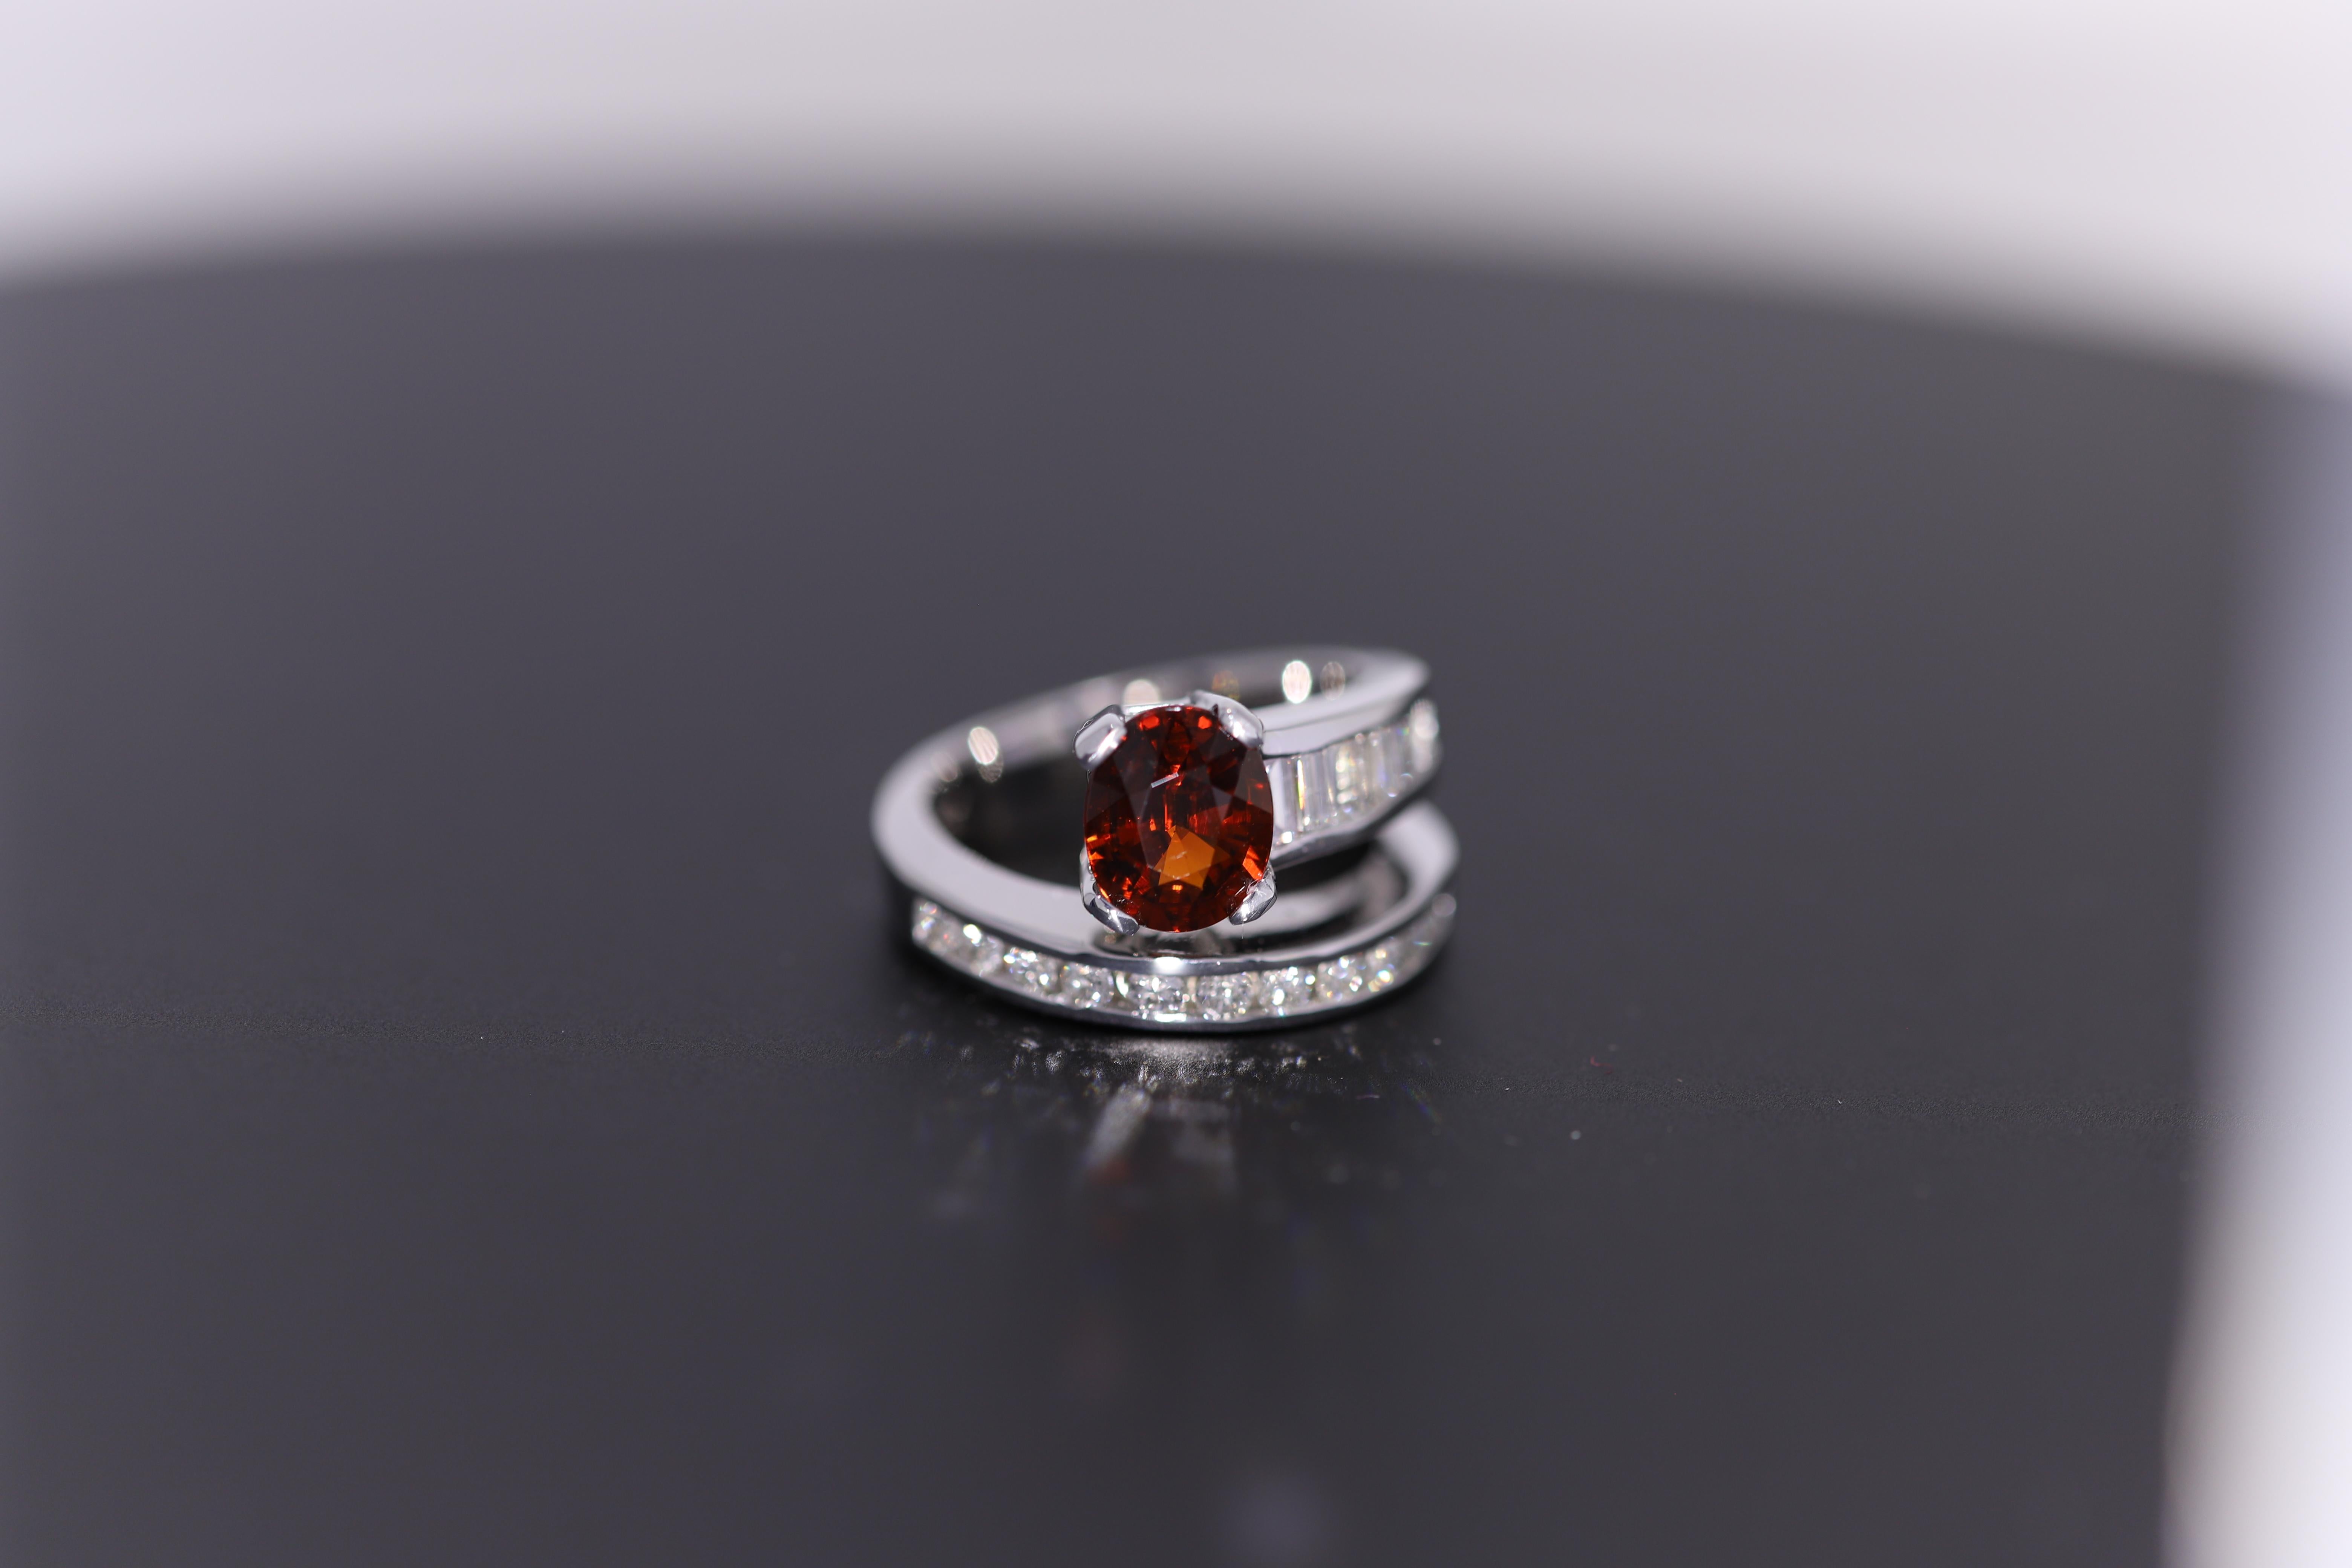 Natural Untreated Unheated Spessartine Garnet from Mozambique 2.34 carat (8 x 7 mm)
with beautiful round & baguette diamonds total 0.90 carat G-VS
14k white gold 10.0 grams
finger size 6.5 - cannot  be resized